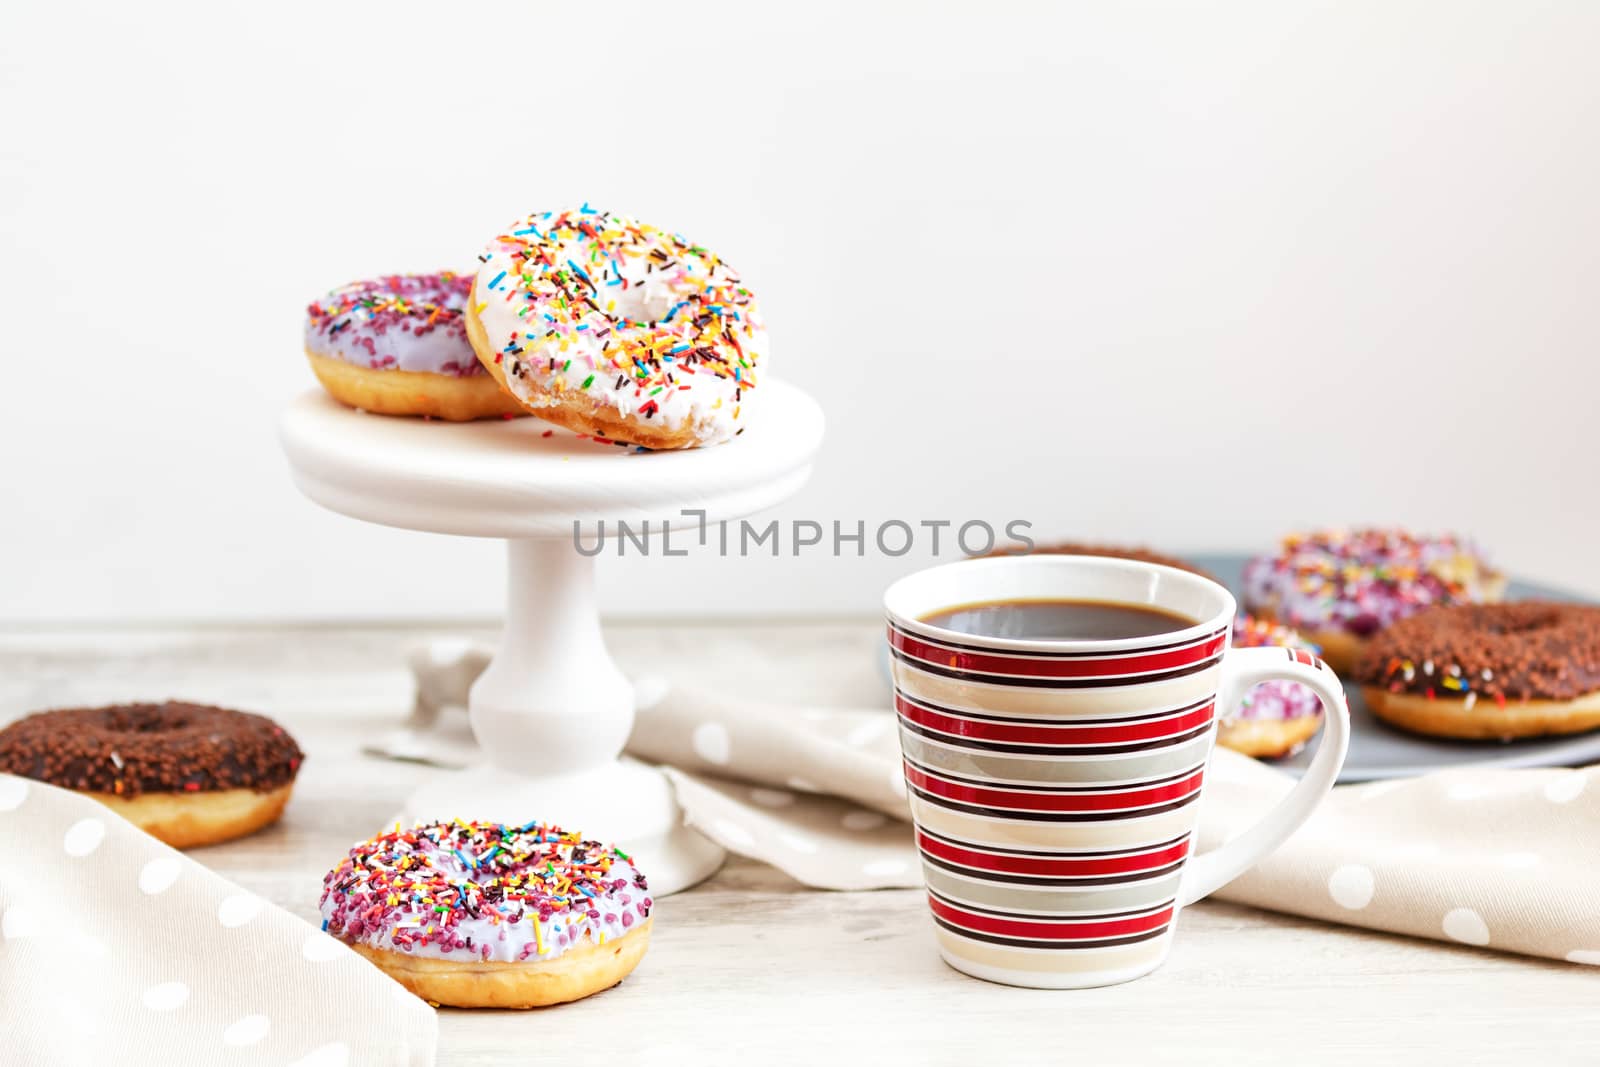 Delicious glazed donuts and cup of coffee on light wooden background. Beautiful romantic breakfast or lunch concept. Shallow depth of the field.